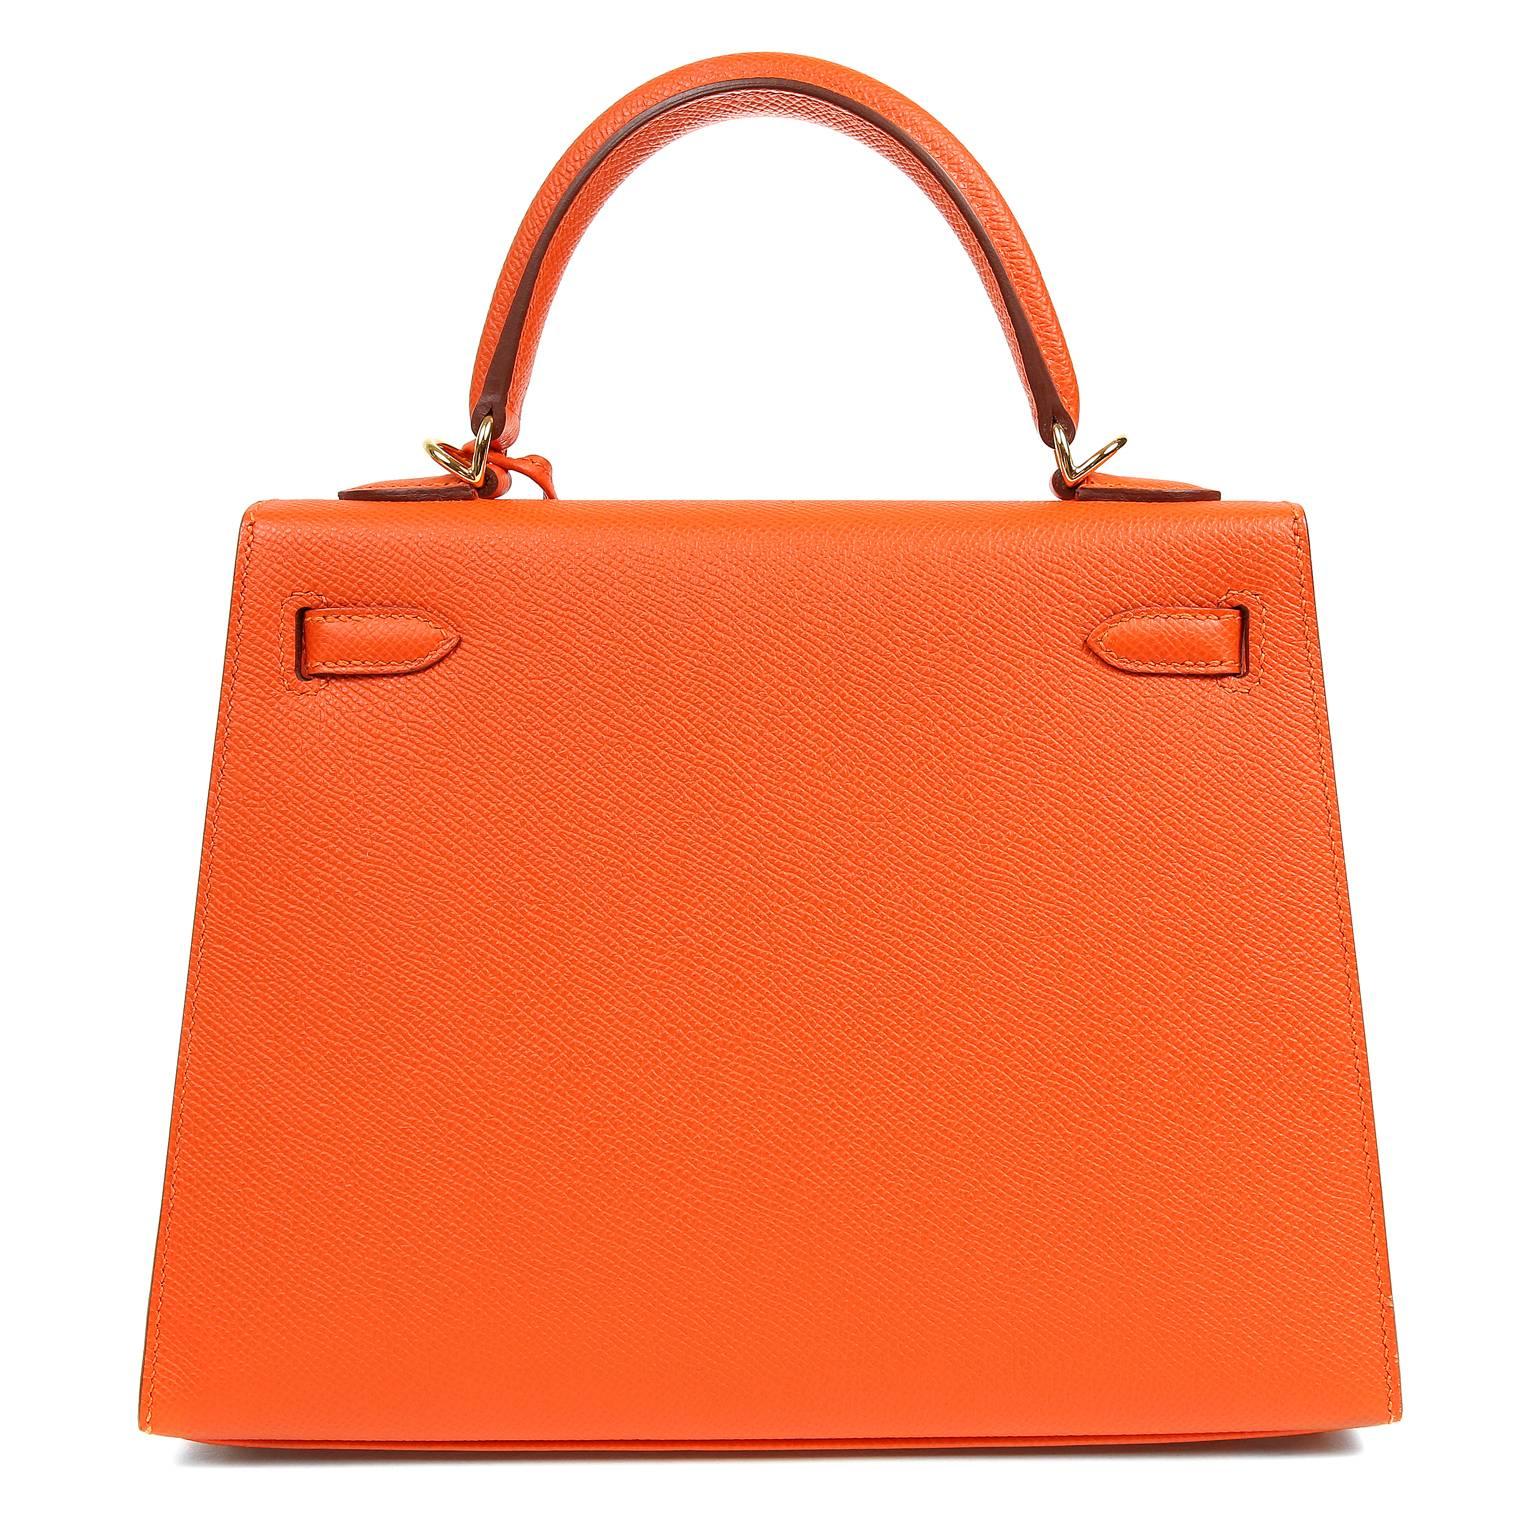  Hermès Feu Epsom 25 cm Kelly Sellier- PRISTINE, unworn condition.   Store fresh, the protective plastic is intact on the hardware.

  Hermès bags are considered the ultimate luxury item worldwide.  Each piece is handcrafted with waitlists that can